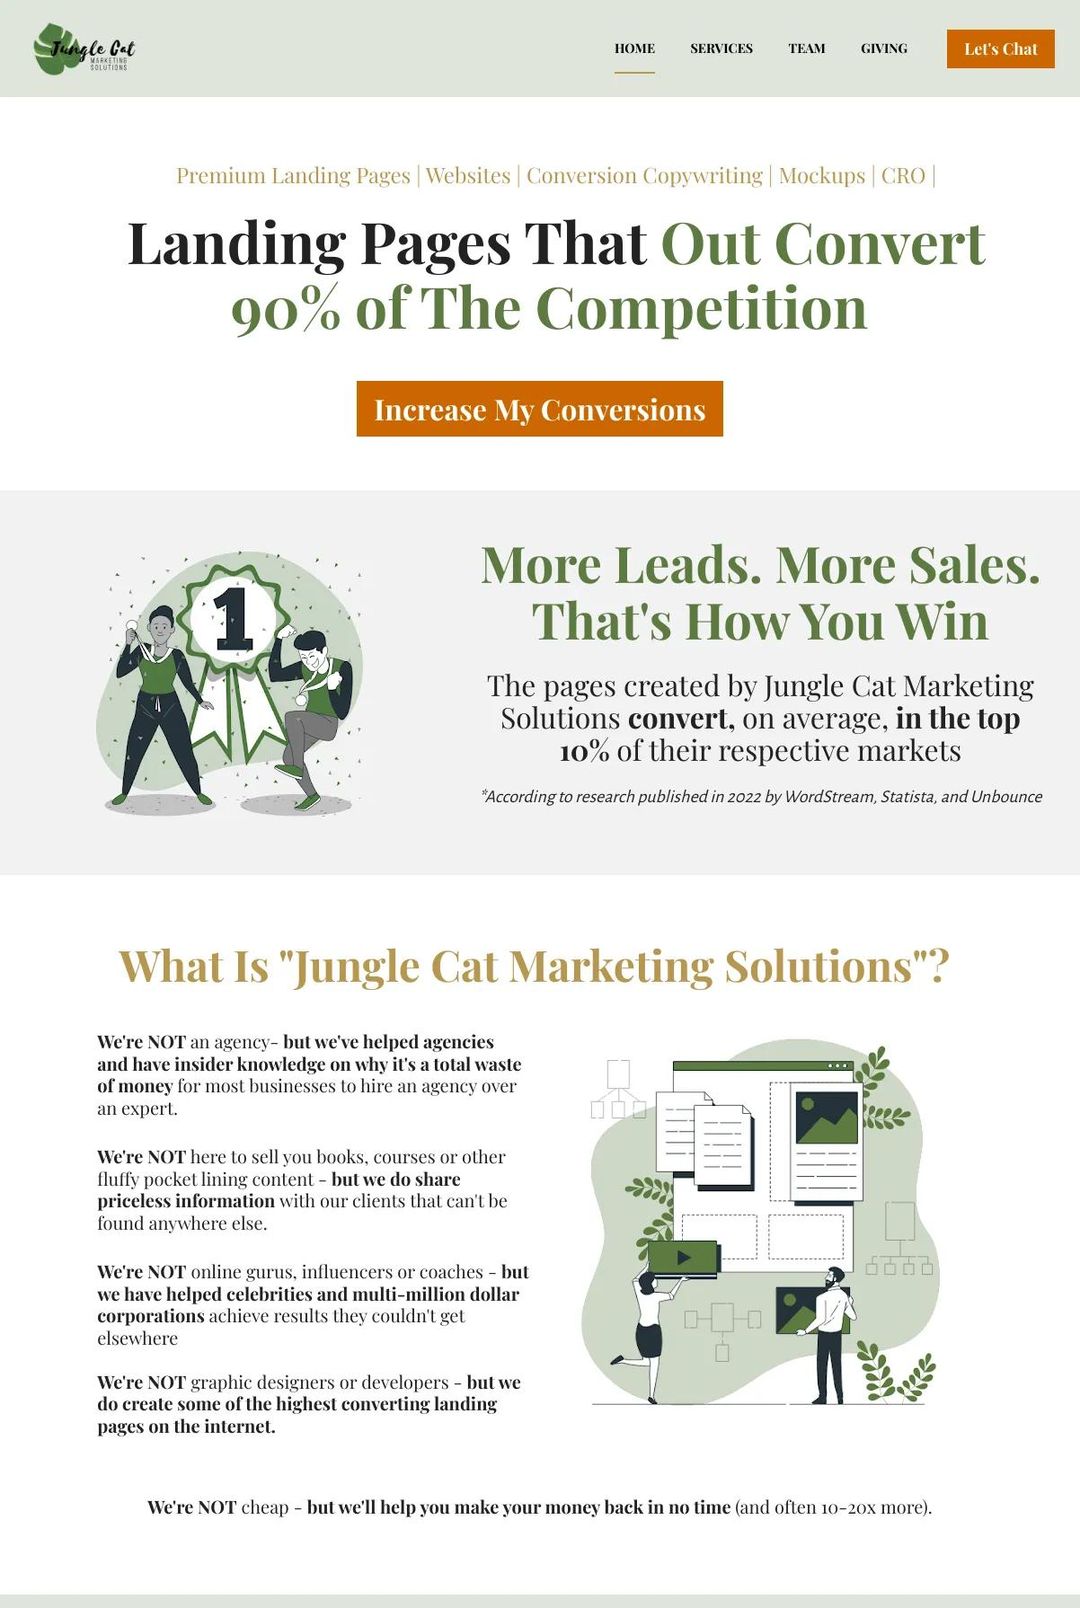 Screenshot 1 of Jungle Cat Marketing (Example Leadpages Website)